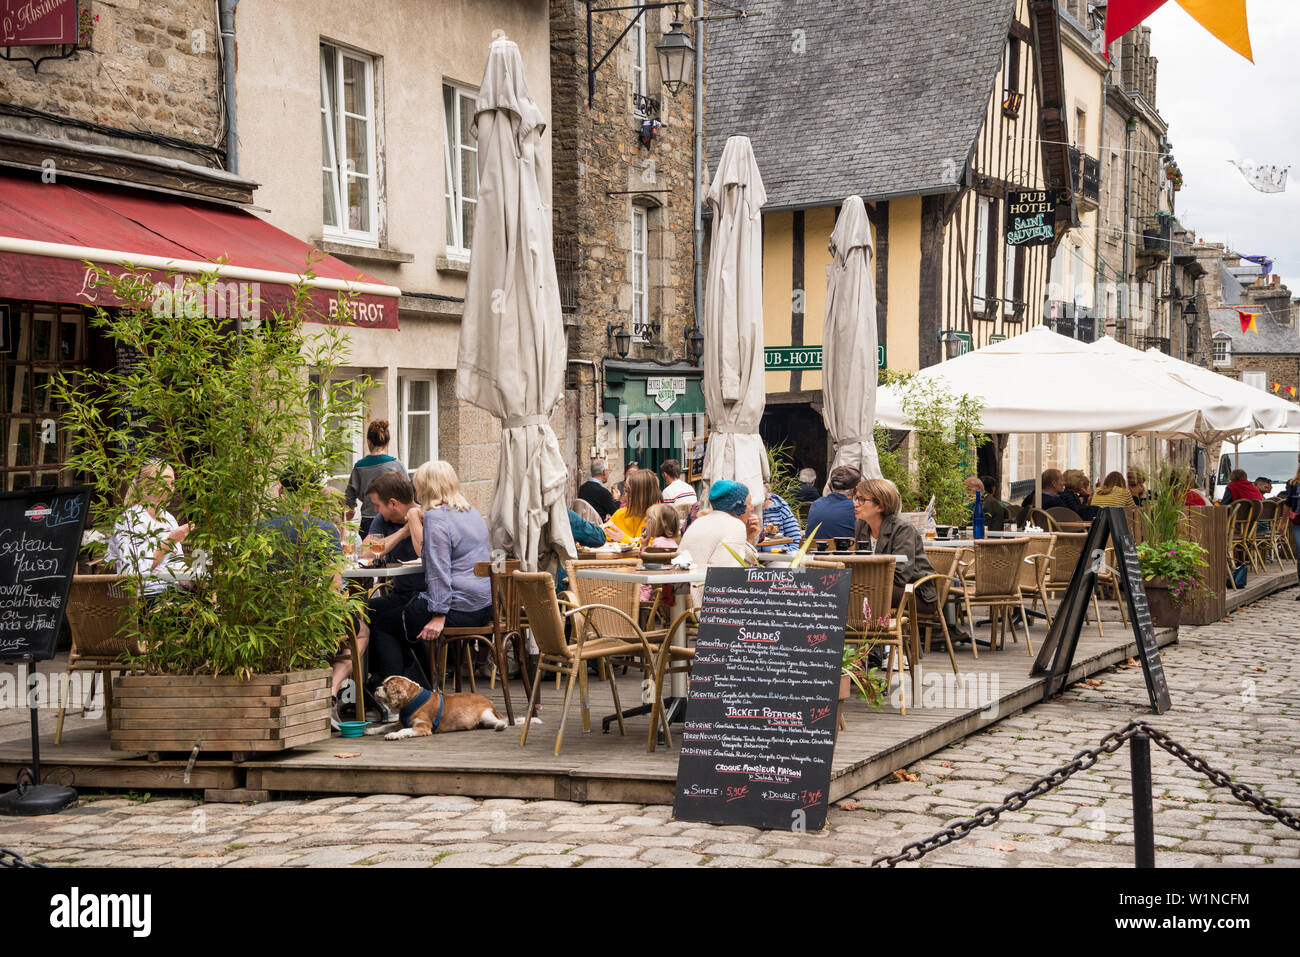 Pavement cafe restaurant, Dinan, Brittany, France Stock Photo